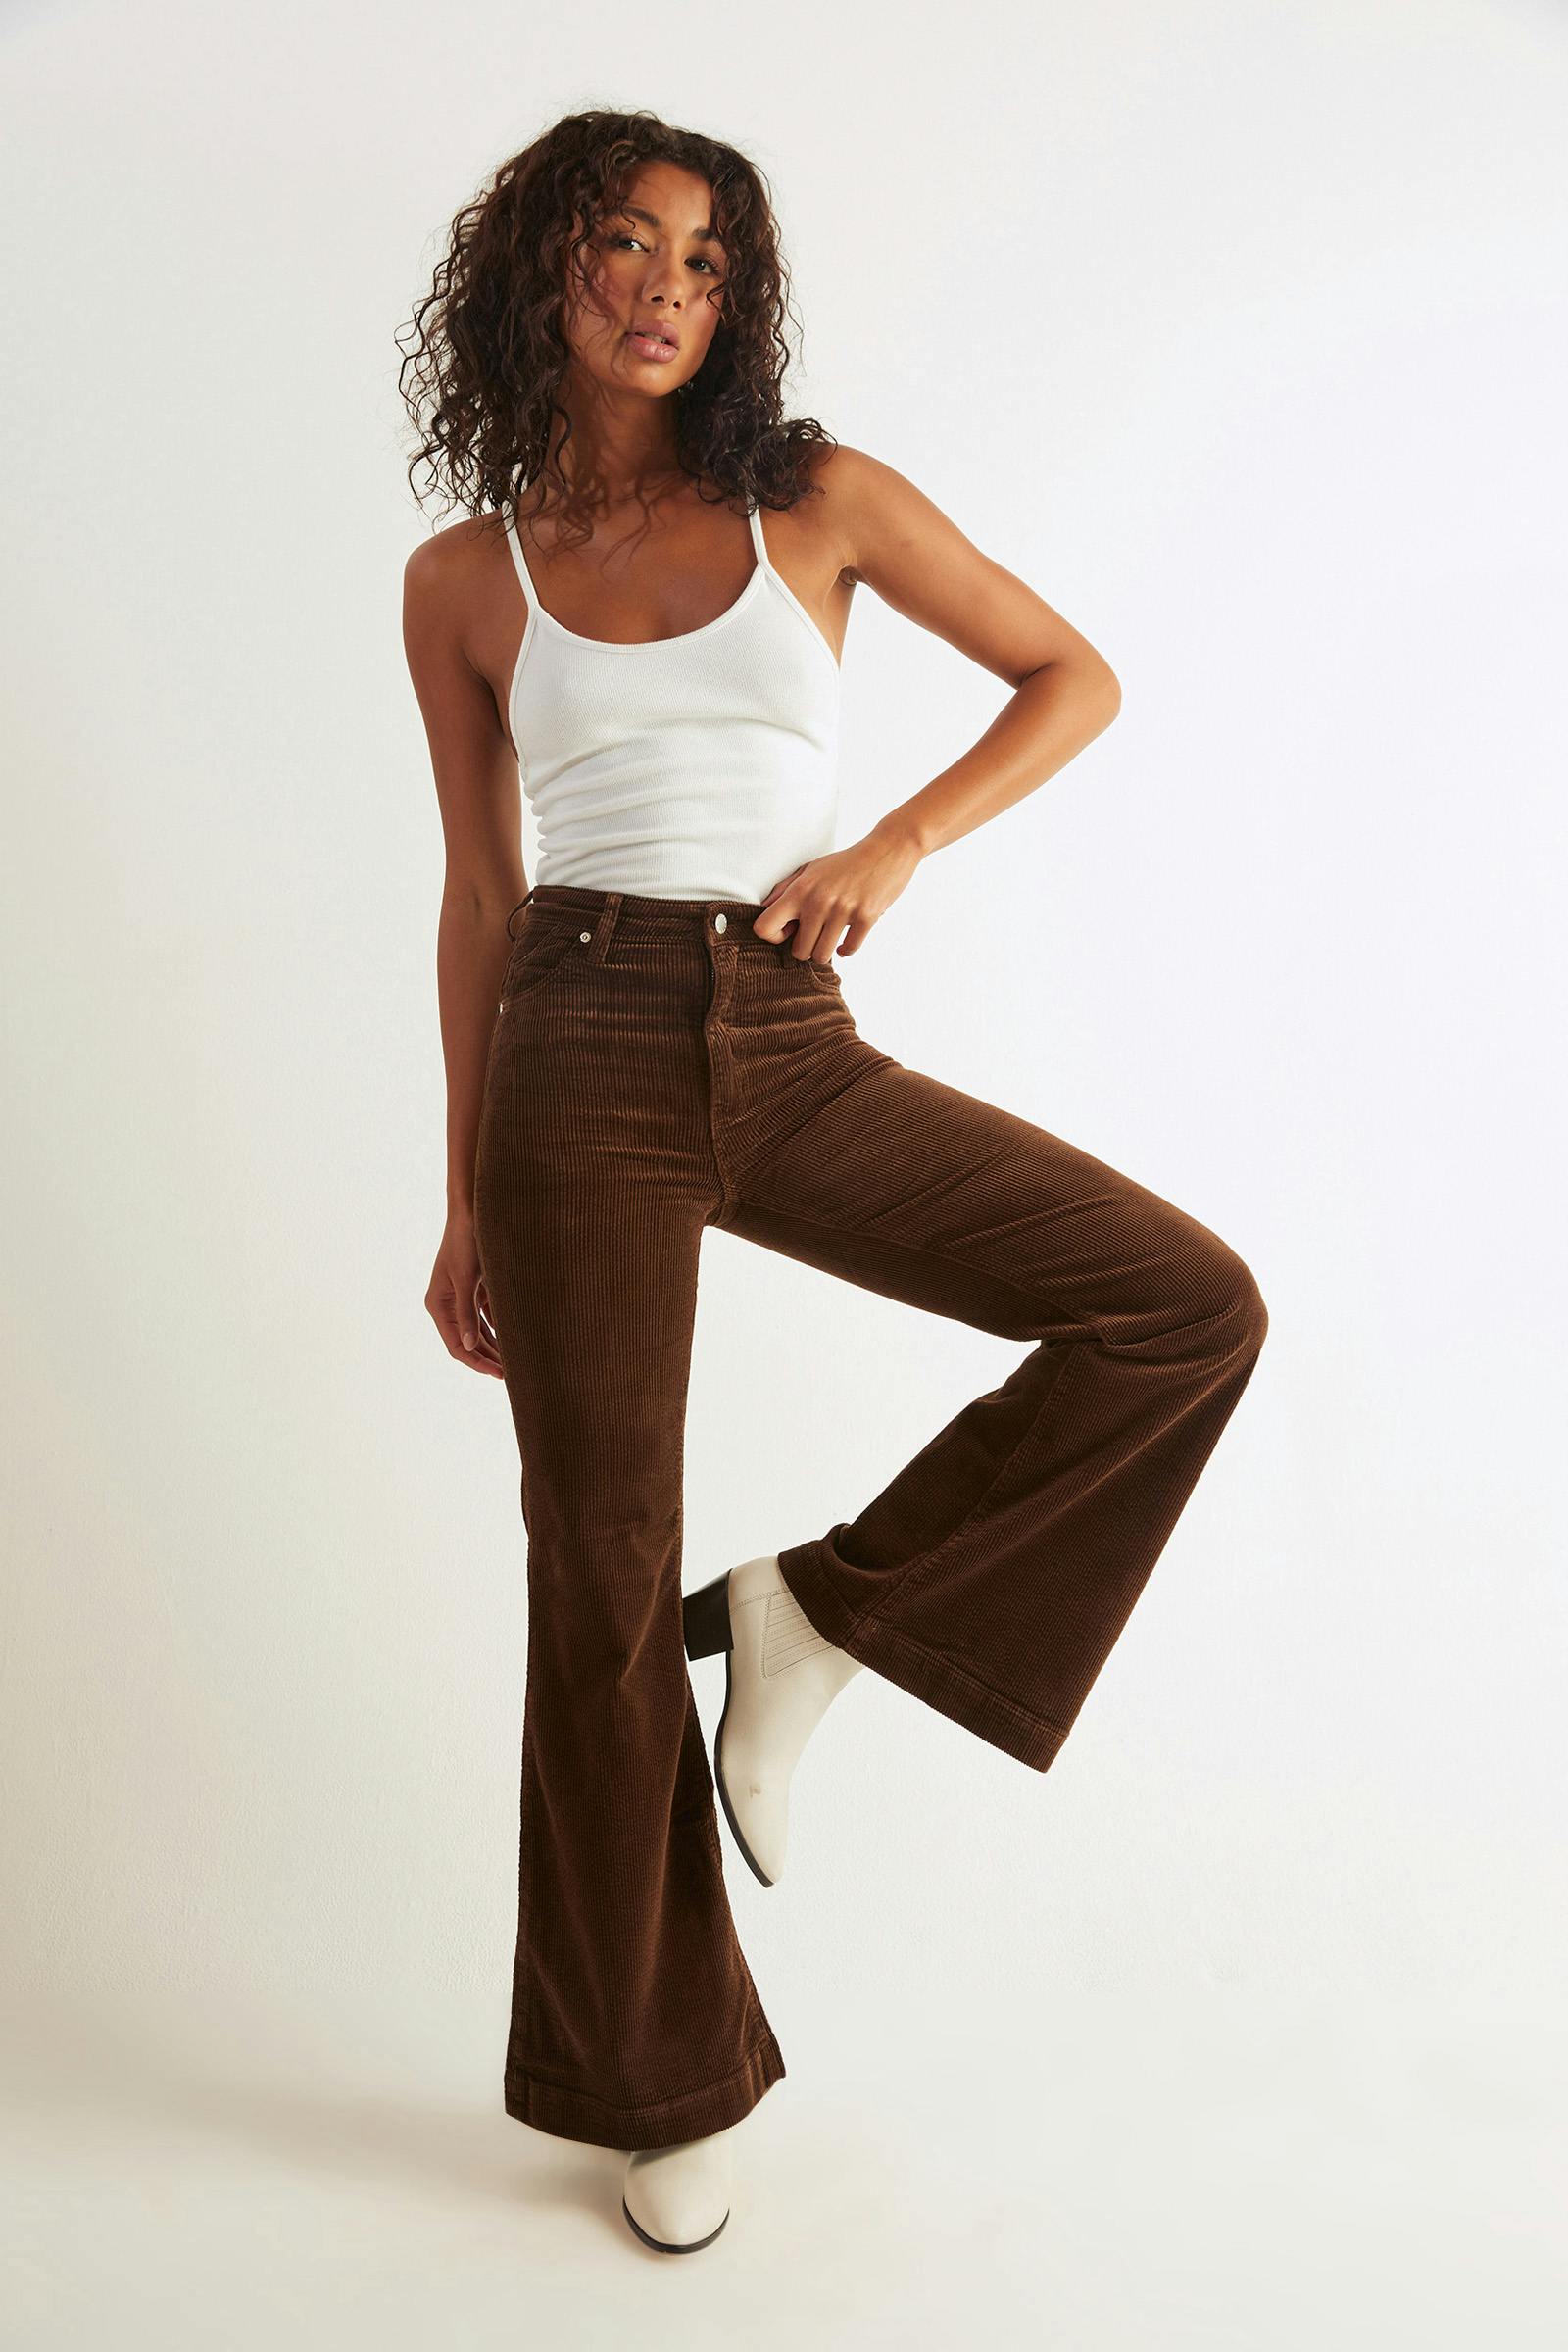 Eastcoast Flare in Tan Cord #tan #corduroy #pants High waisted corduroy  flares from Rolla's with a fitted, fla…